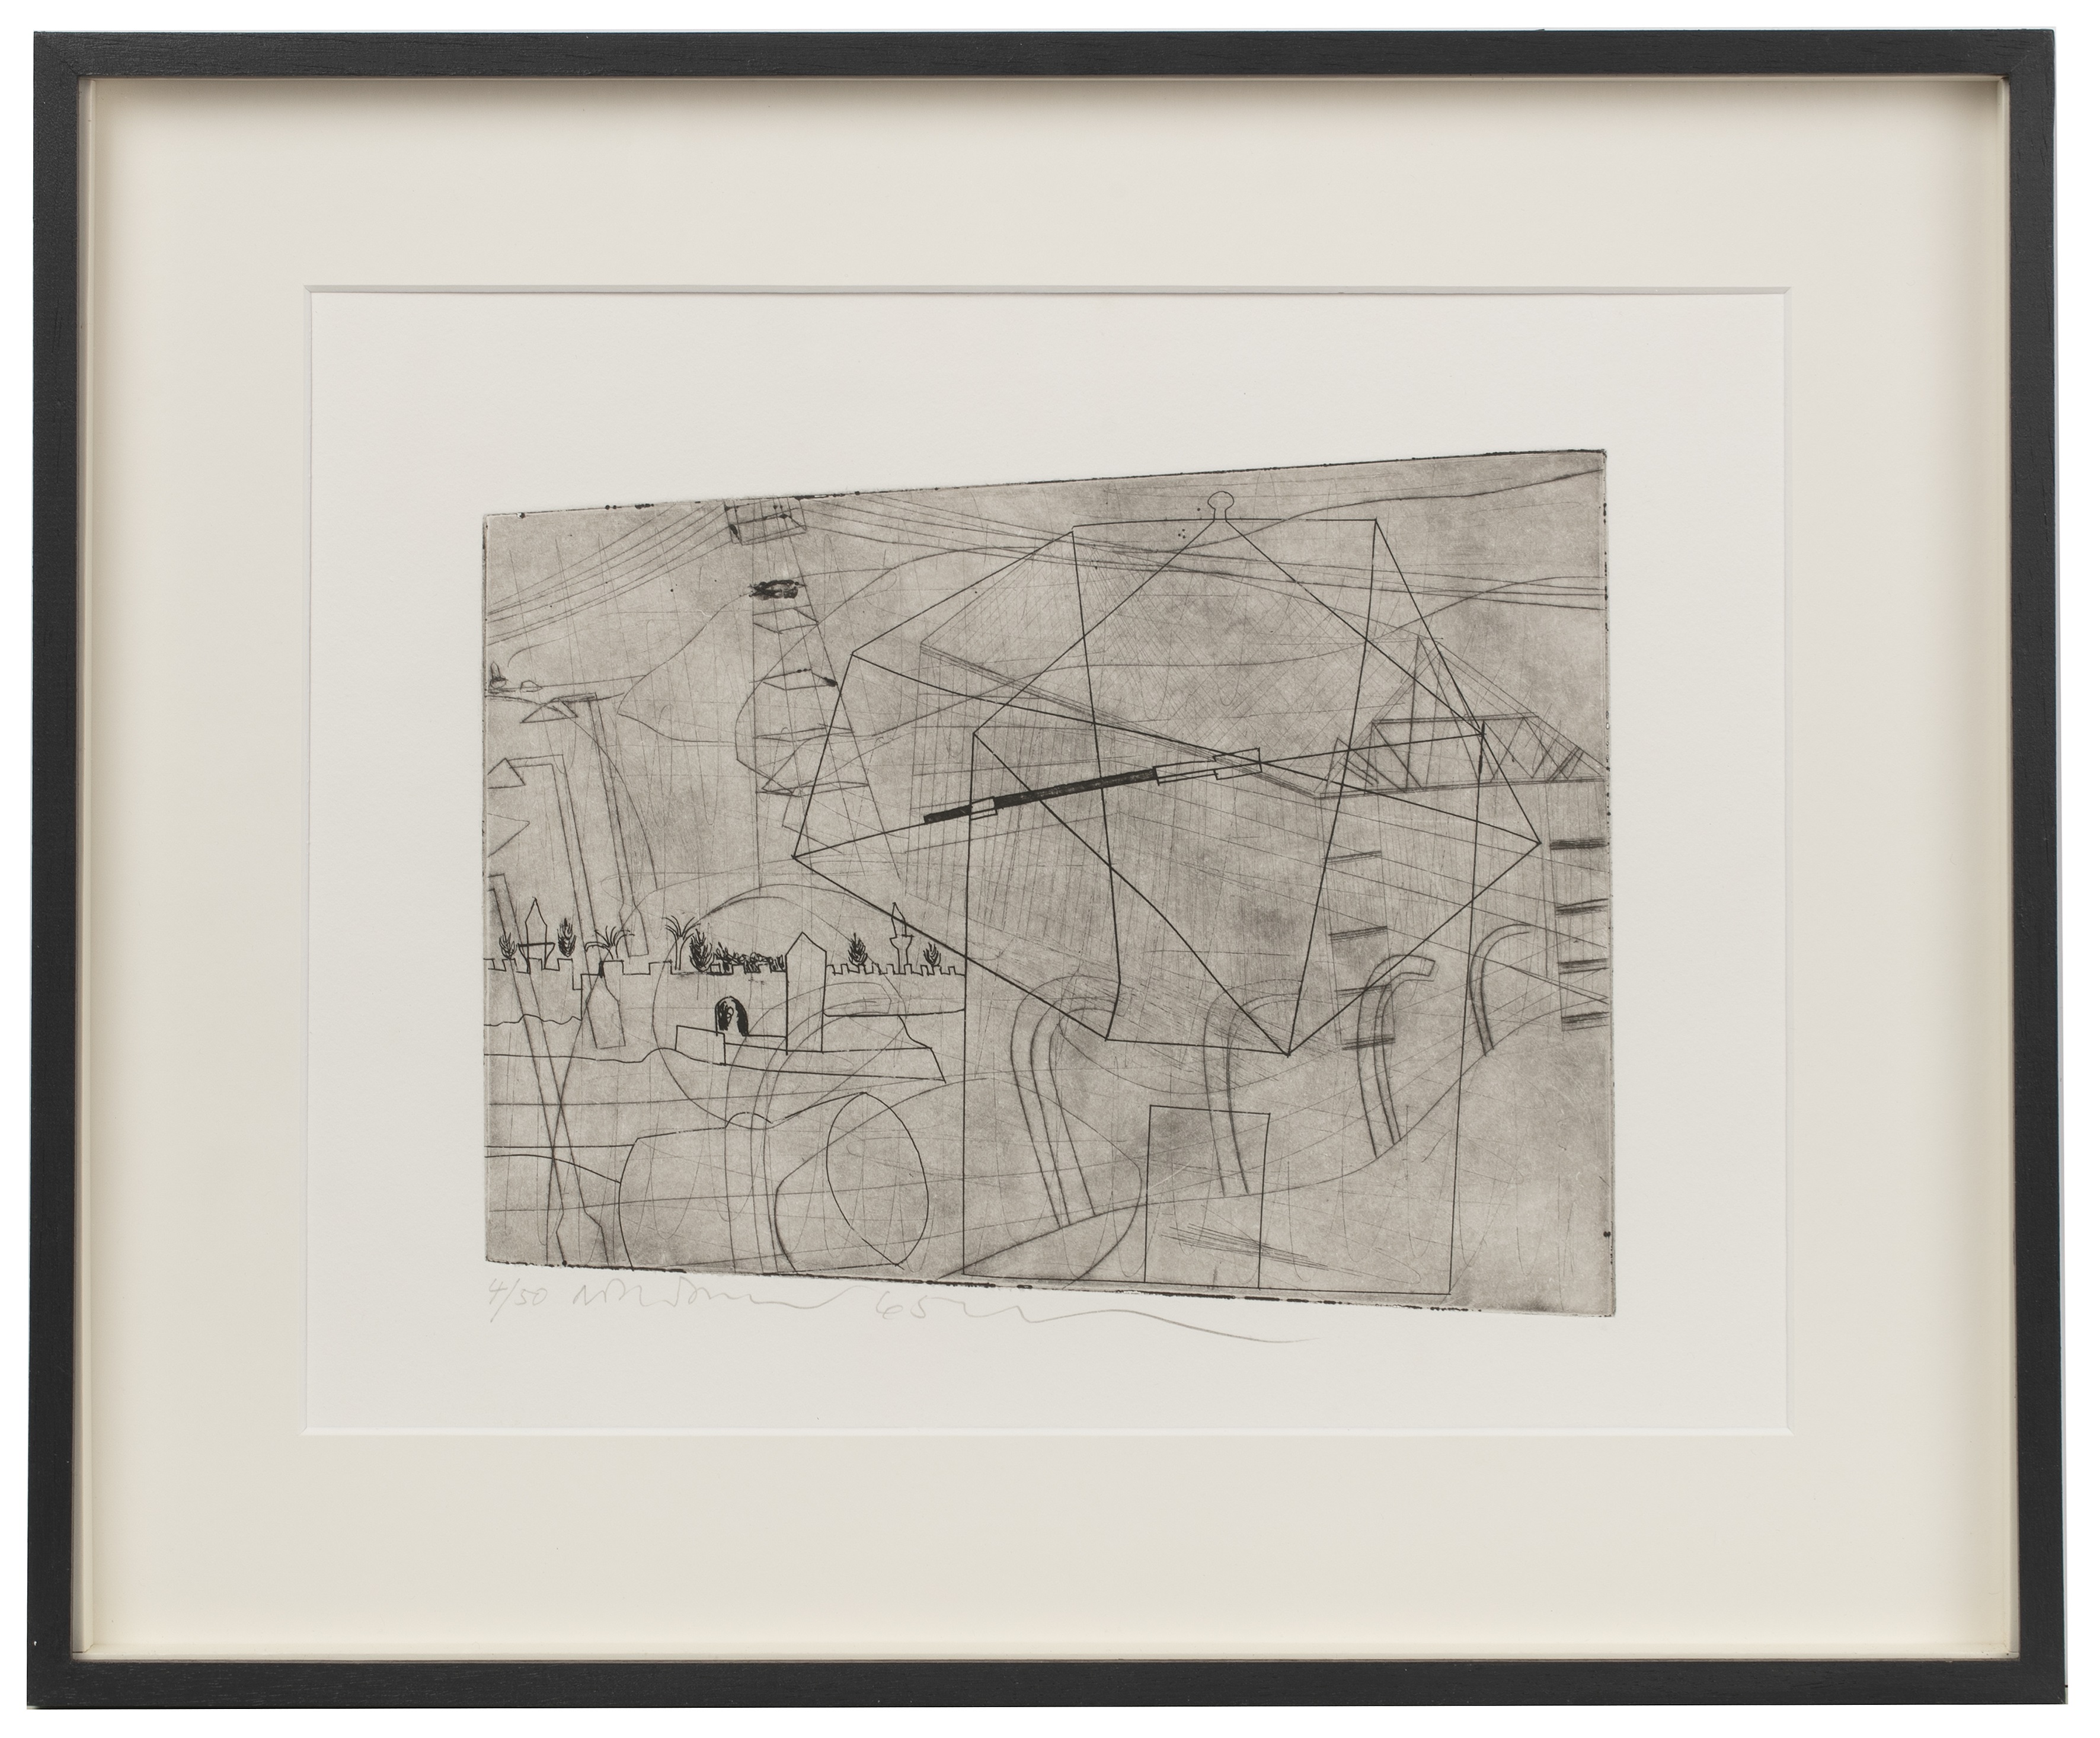 Ben Nicholson (1894-1982) Moonshine,1965/6 4/50, signed and numbered in pencil (in the margin) - Image 2 of 8